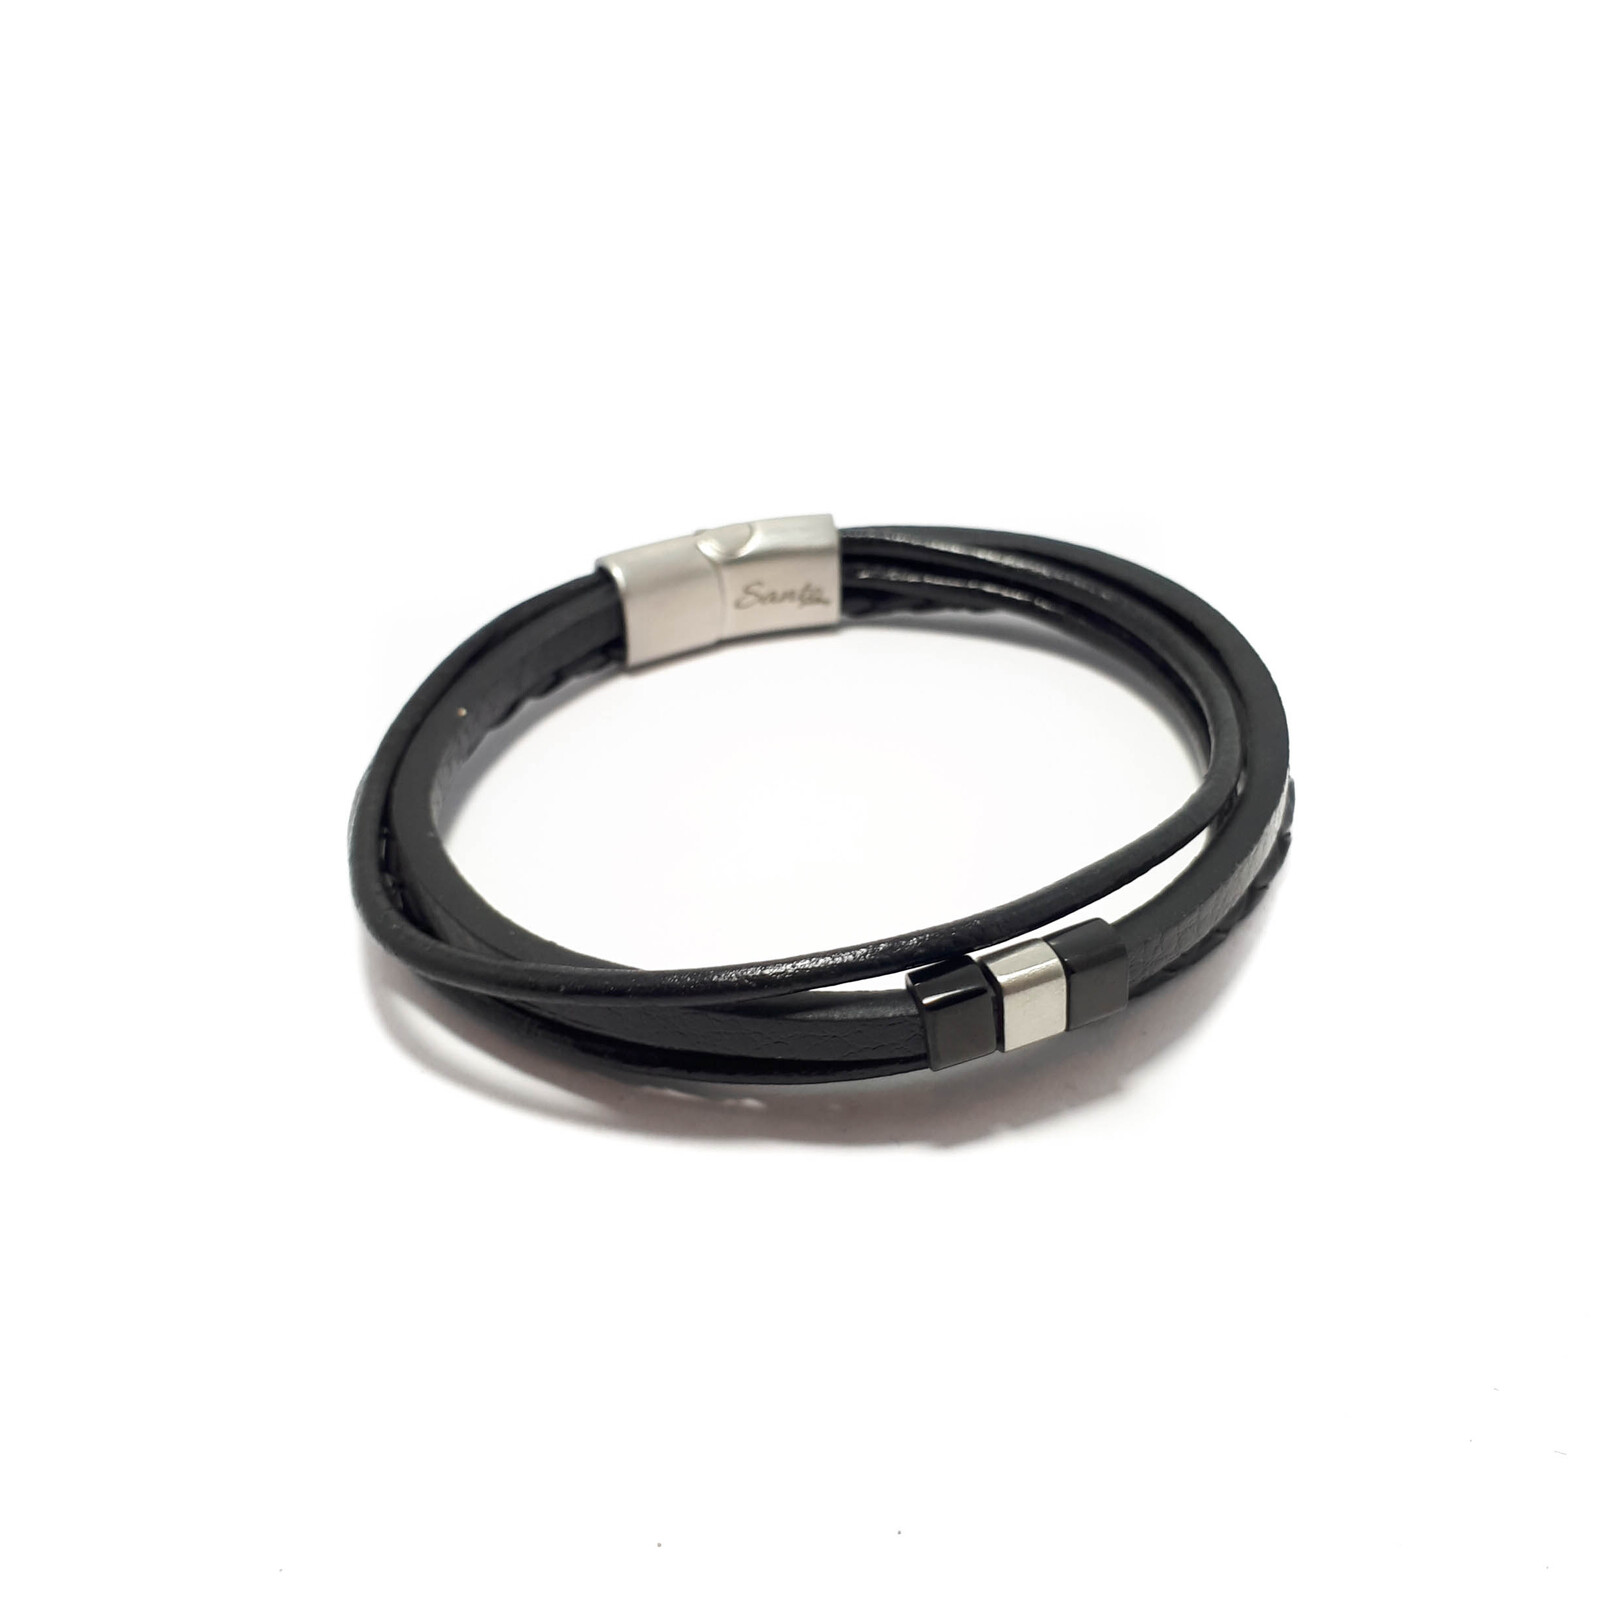 FOUR STRAND BLACK LEATHER BRACELET WITH FLAT STAINLESS STEEL BEADS ...